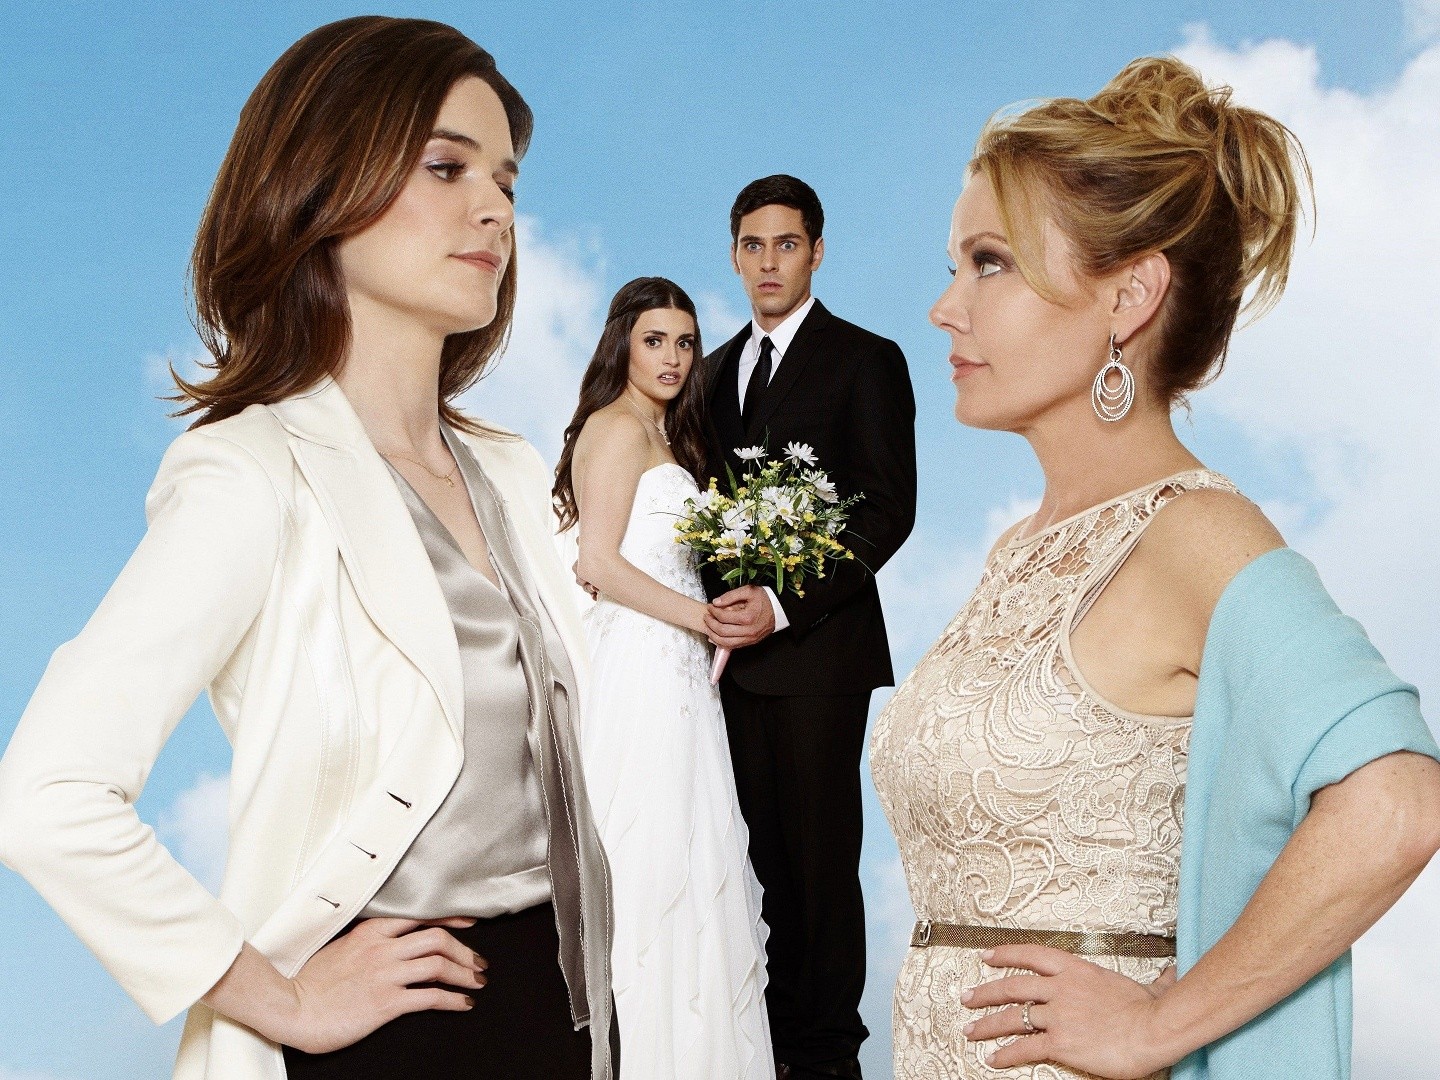 Mother of the Bride: Cast, Release Date, Photos and Plot of